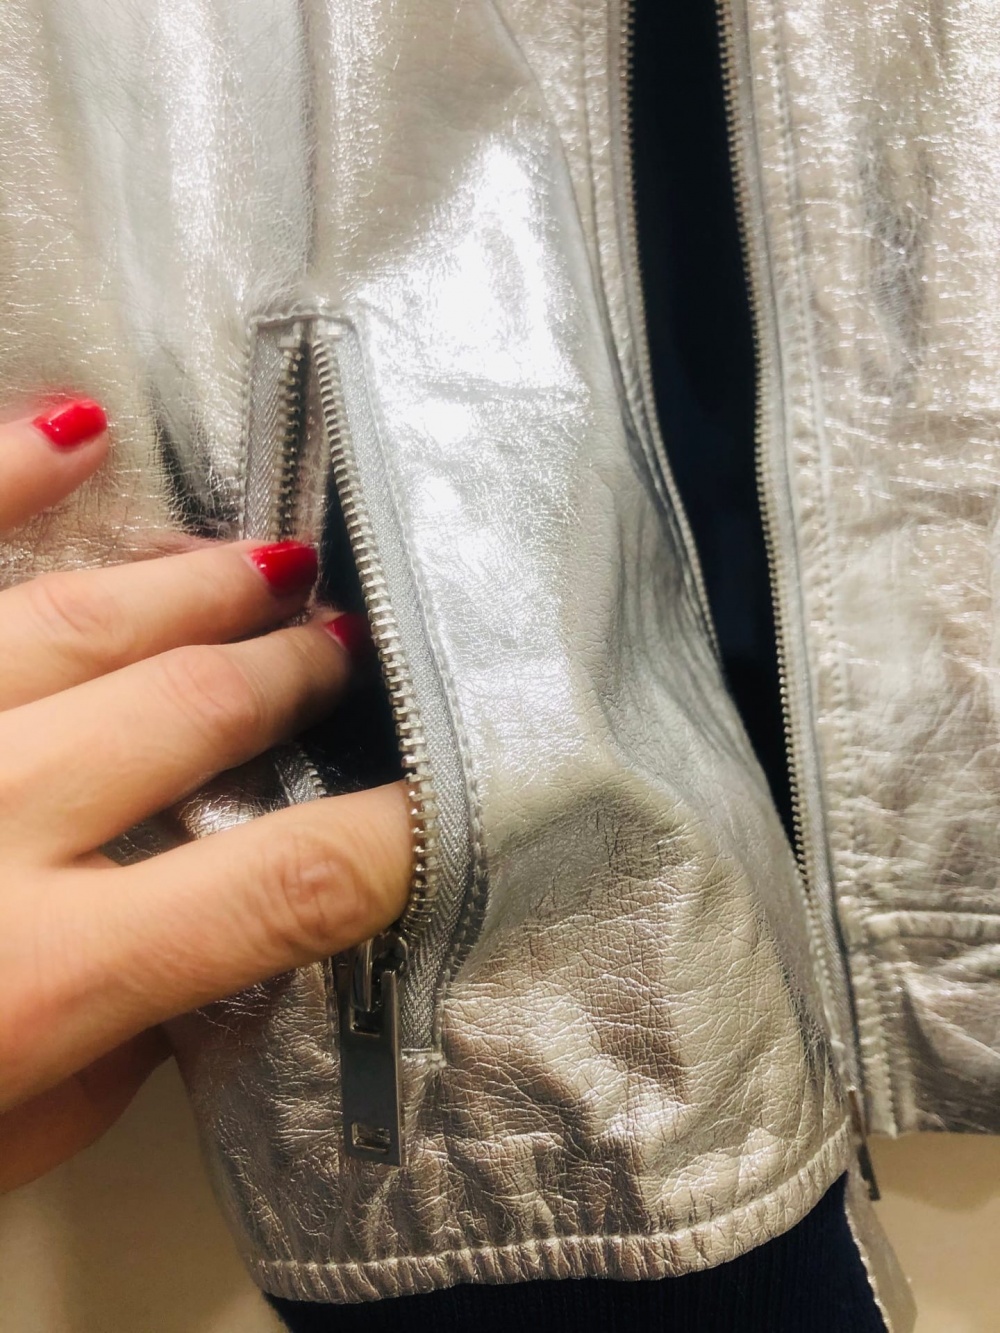 Бомбер Zara Silver Leather Jacket Bonjour Les Filles. Размер XS-S.